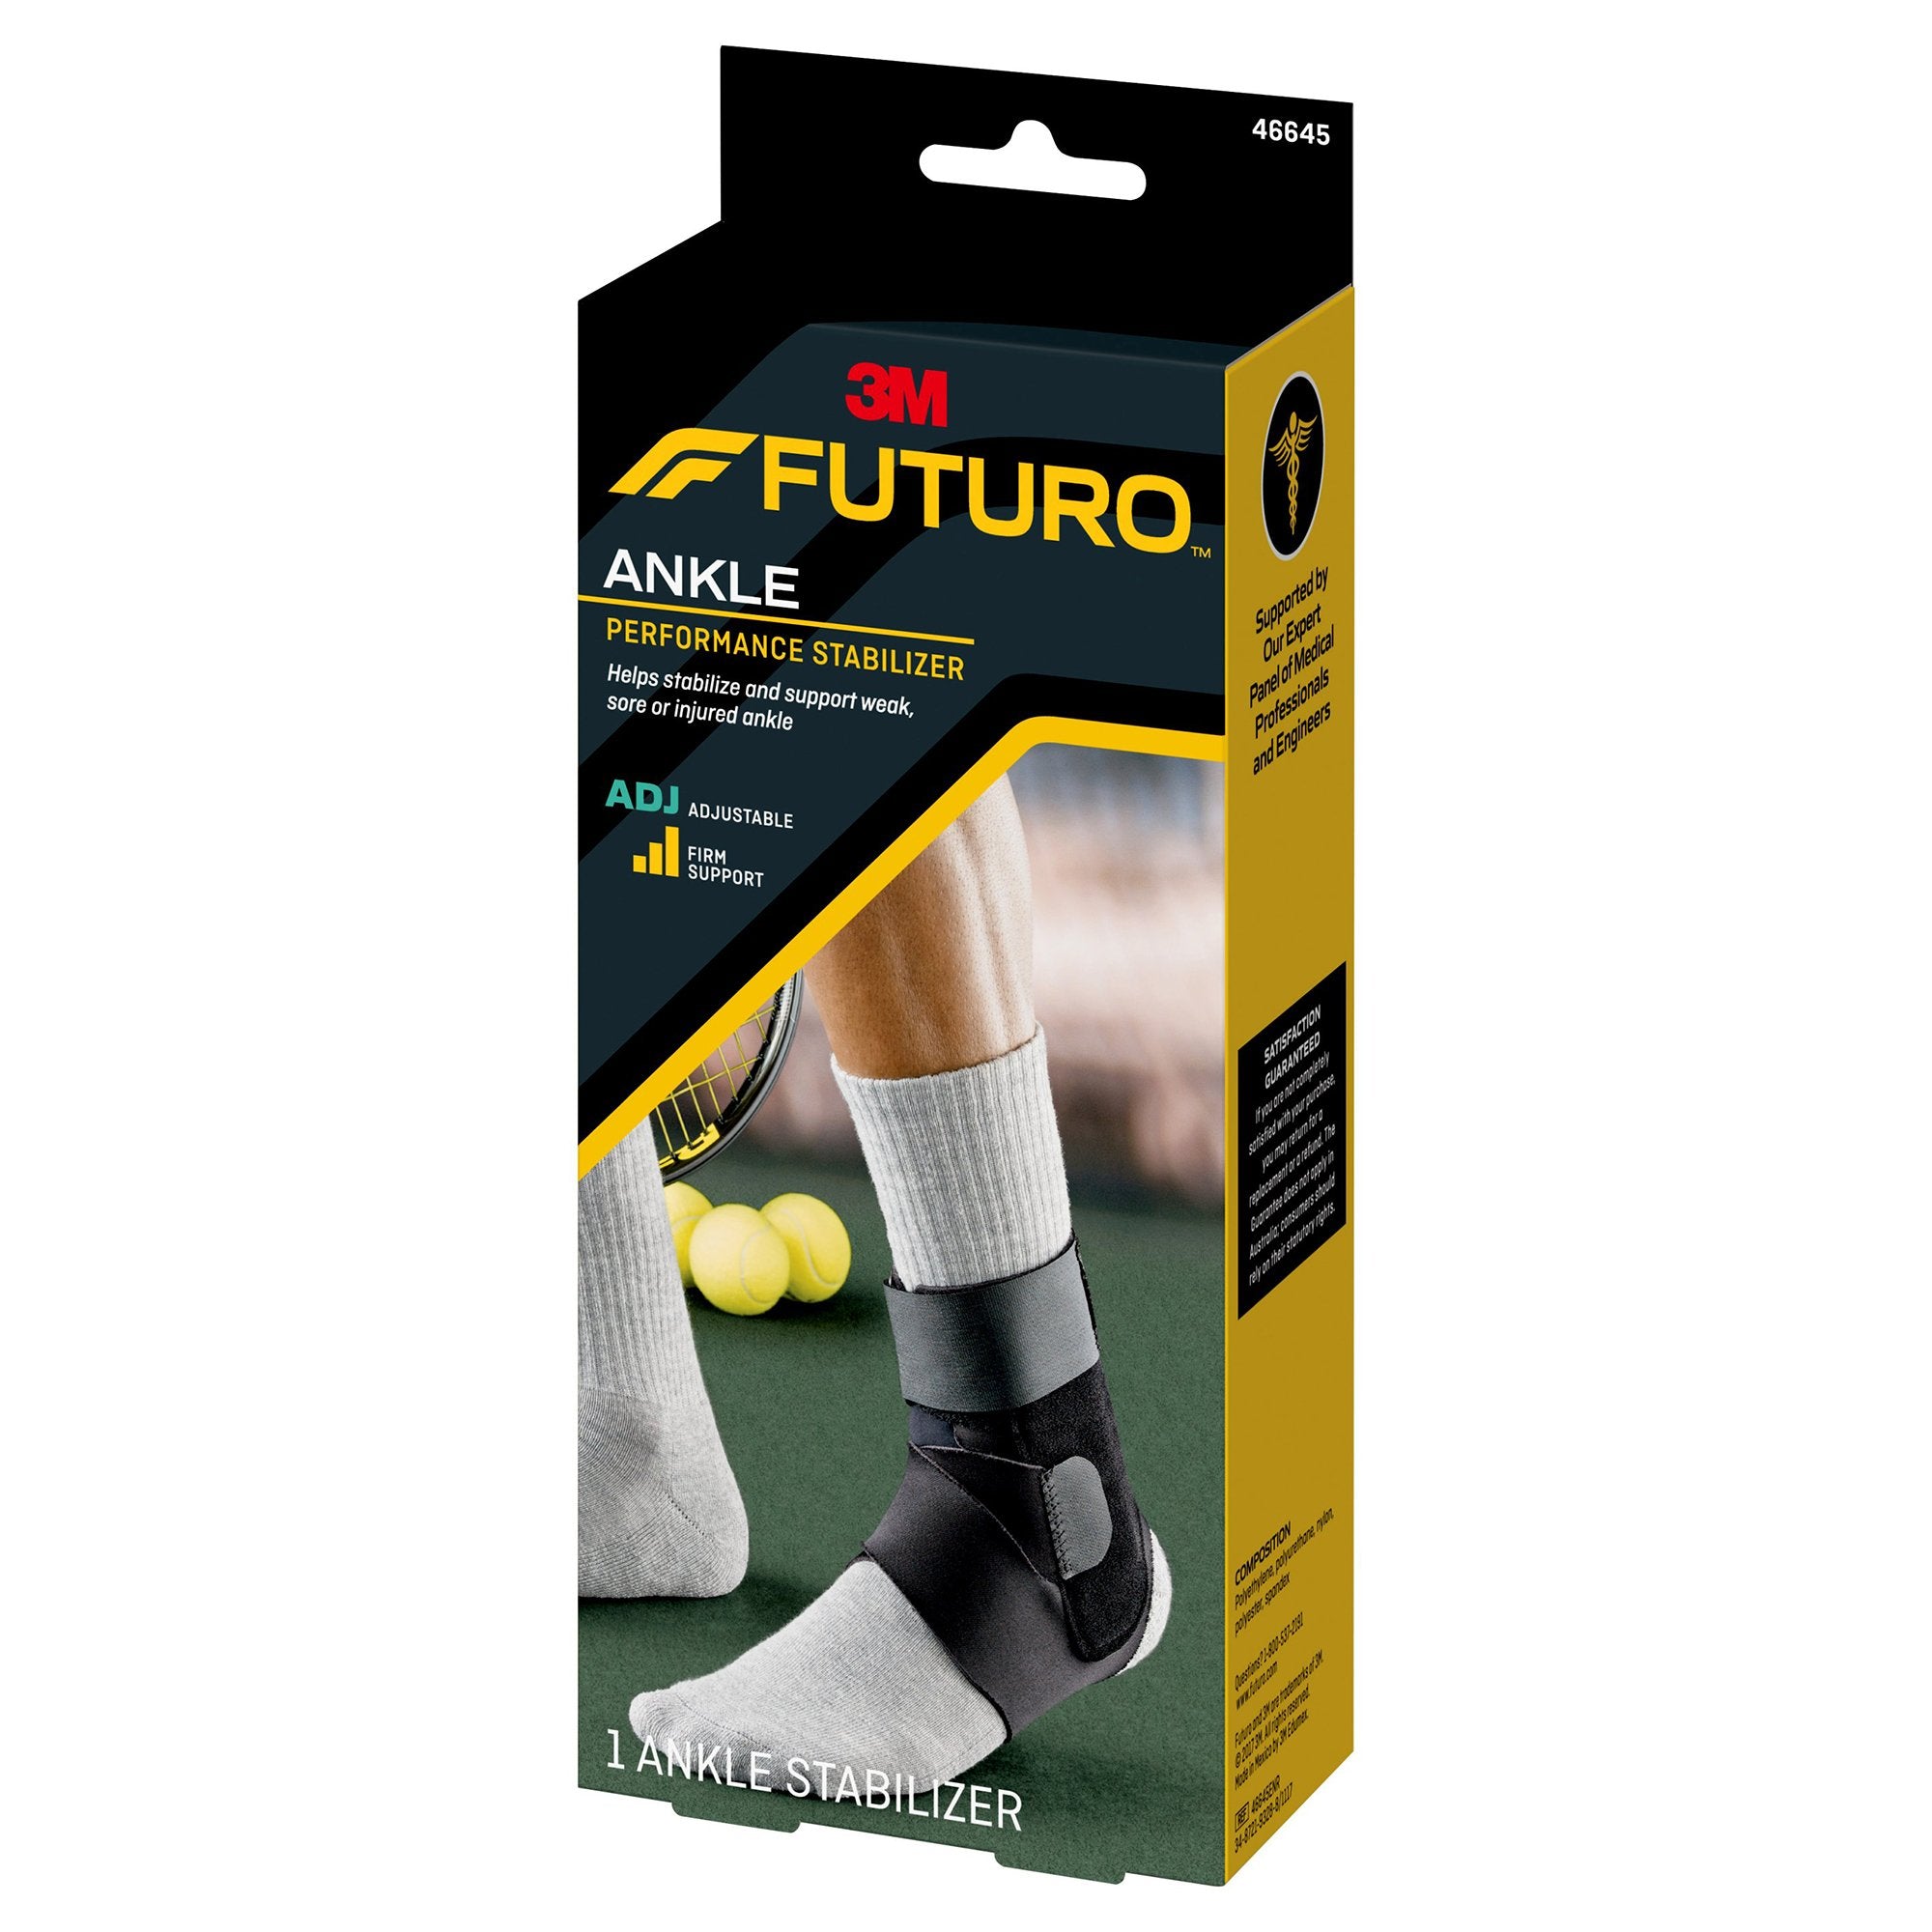 Ankle Stabilizer 3M™ Futuro™ Sport Deluxe One Size Fits Most D-Ring / Hook and Loop Strap Closure Foot